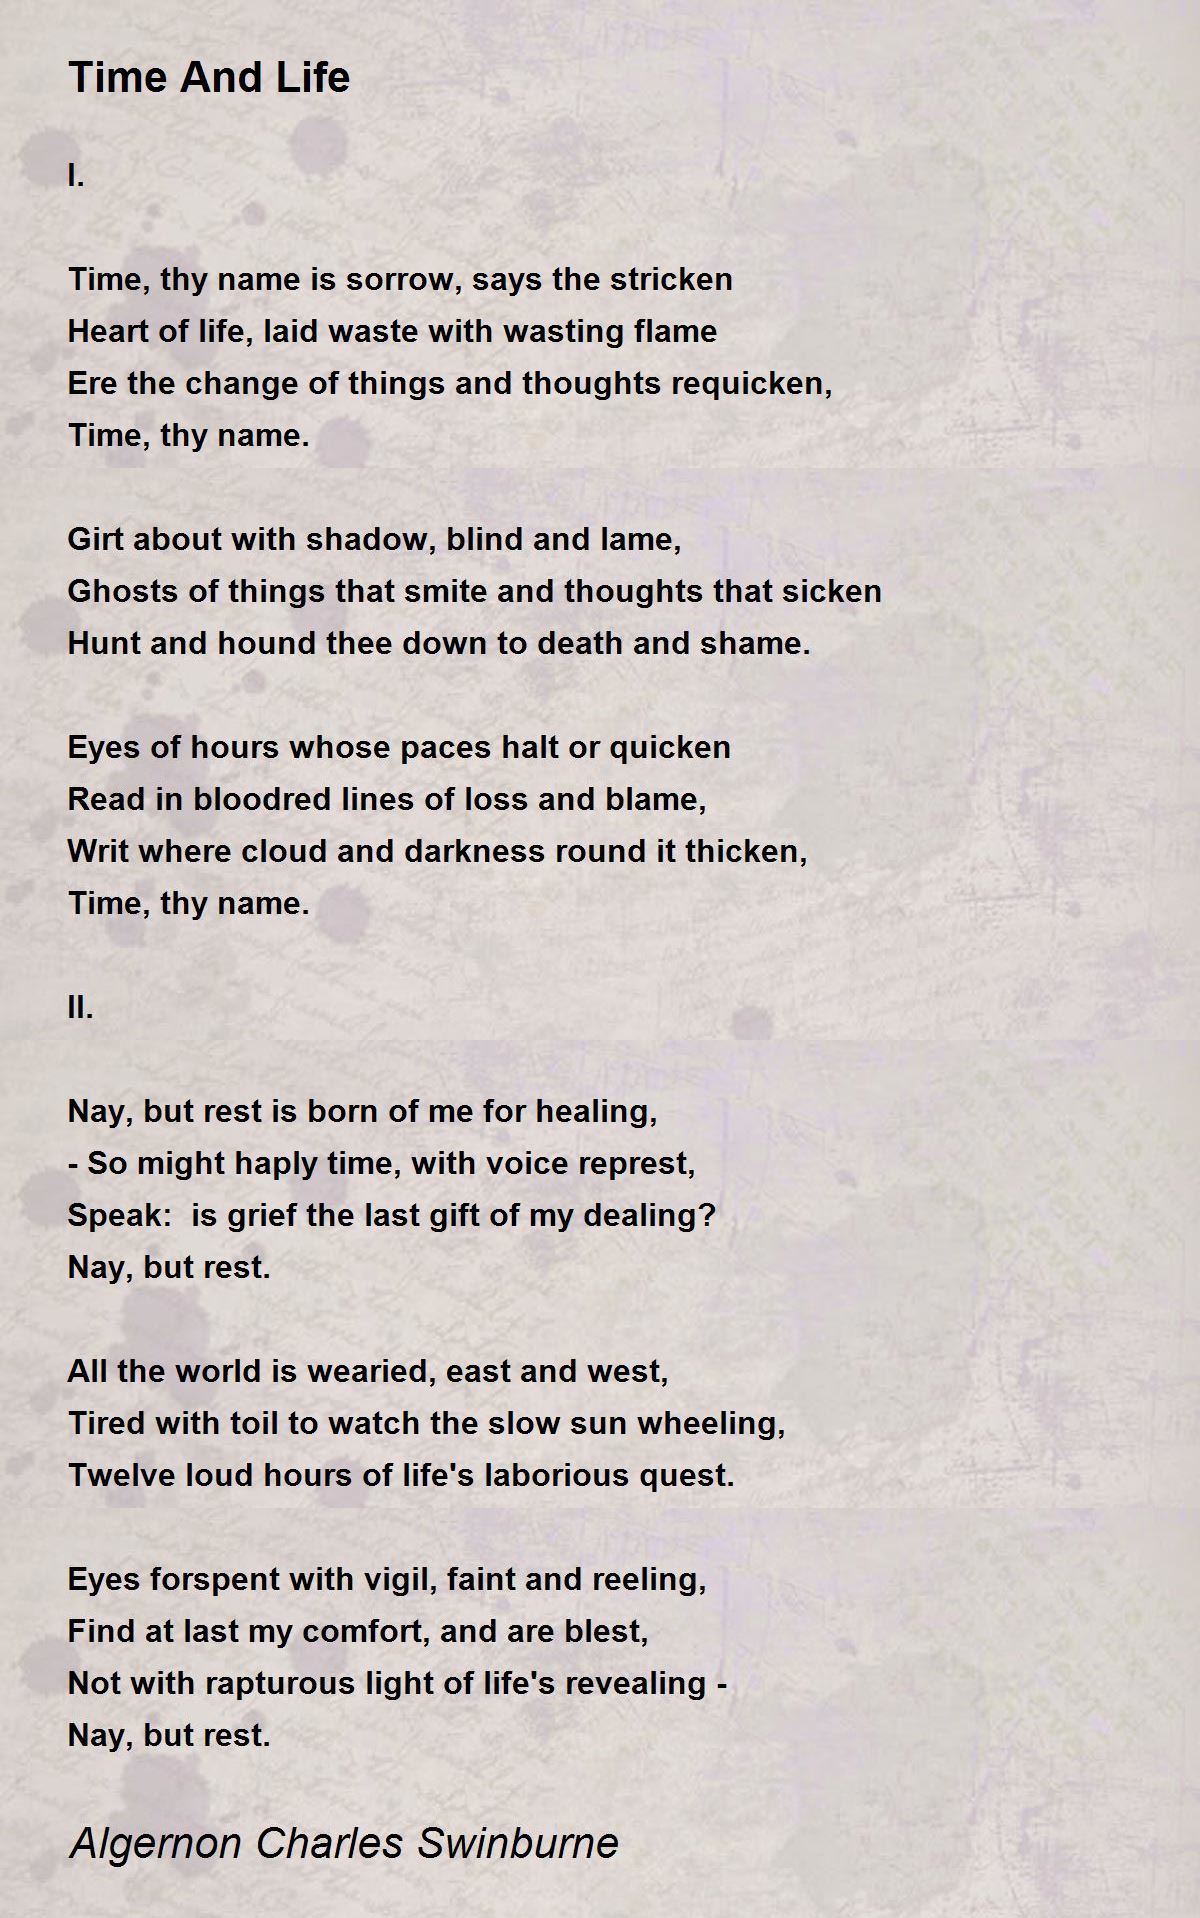 Time And Life - Time And Life Poem by Algernon Charles Swinburne